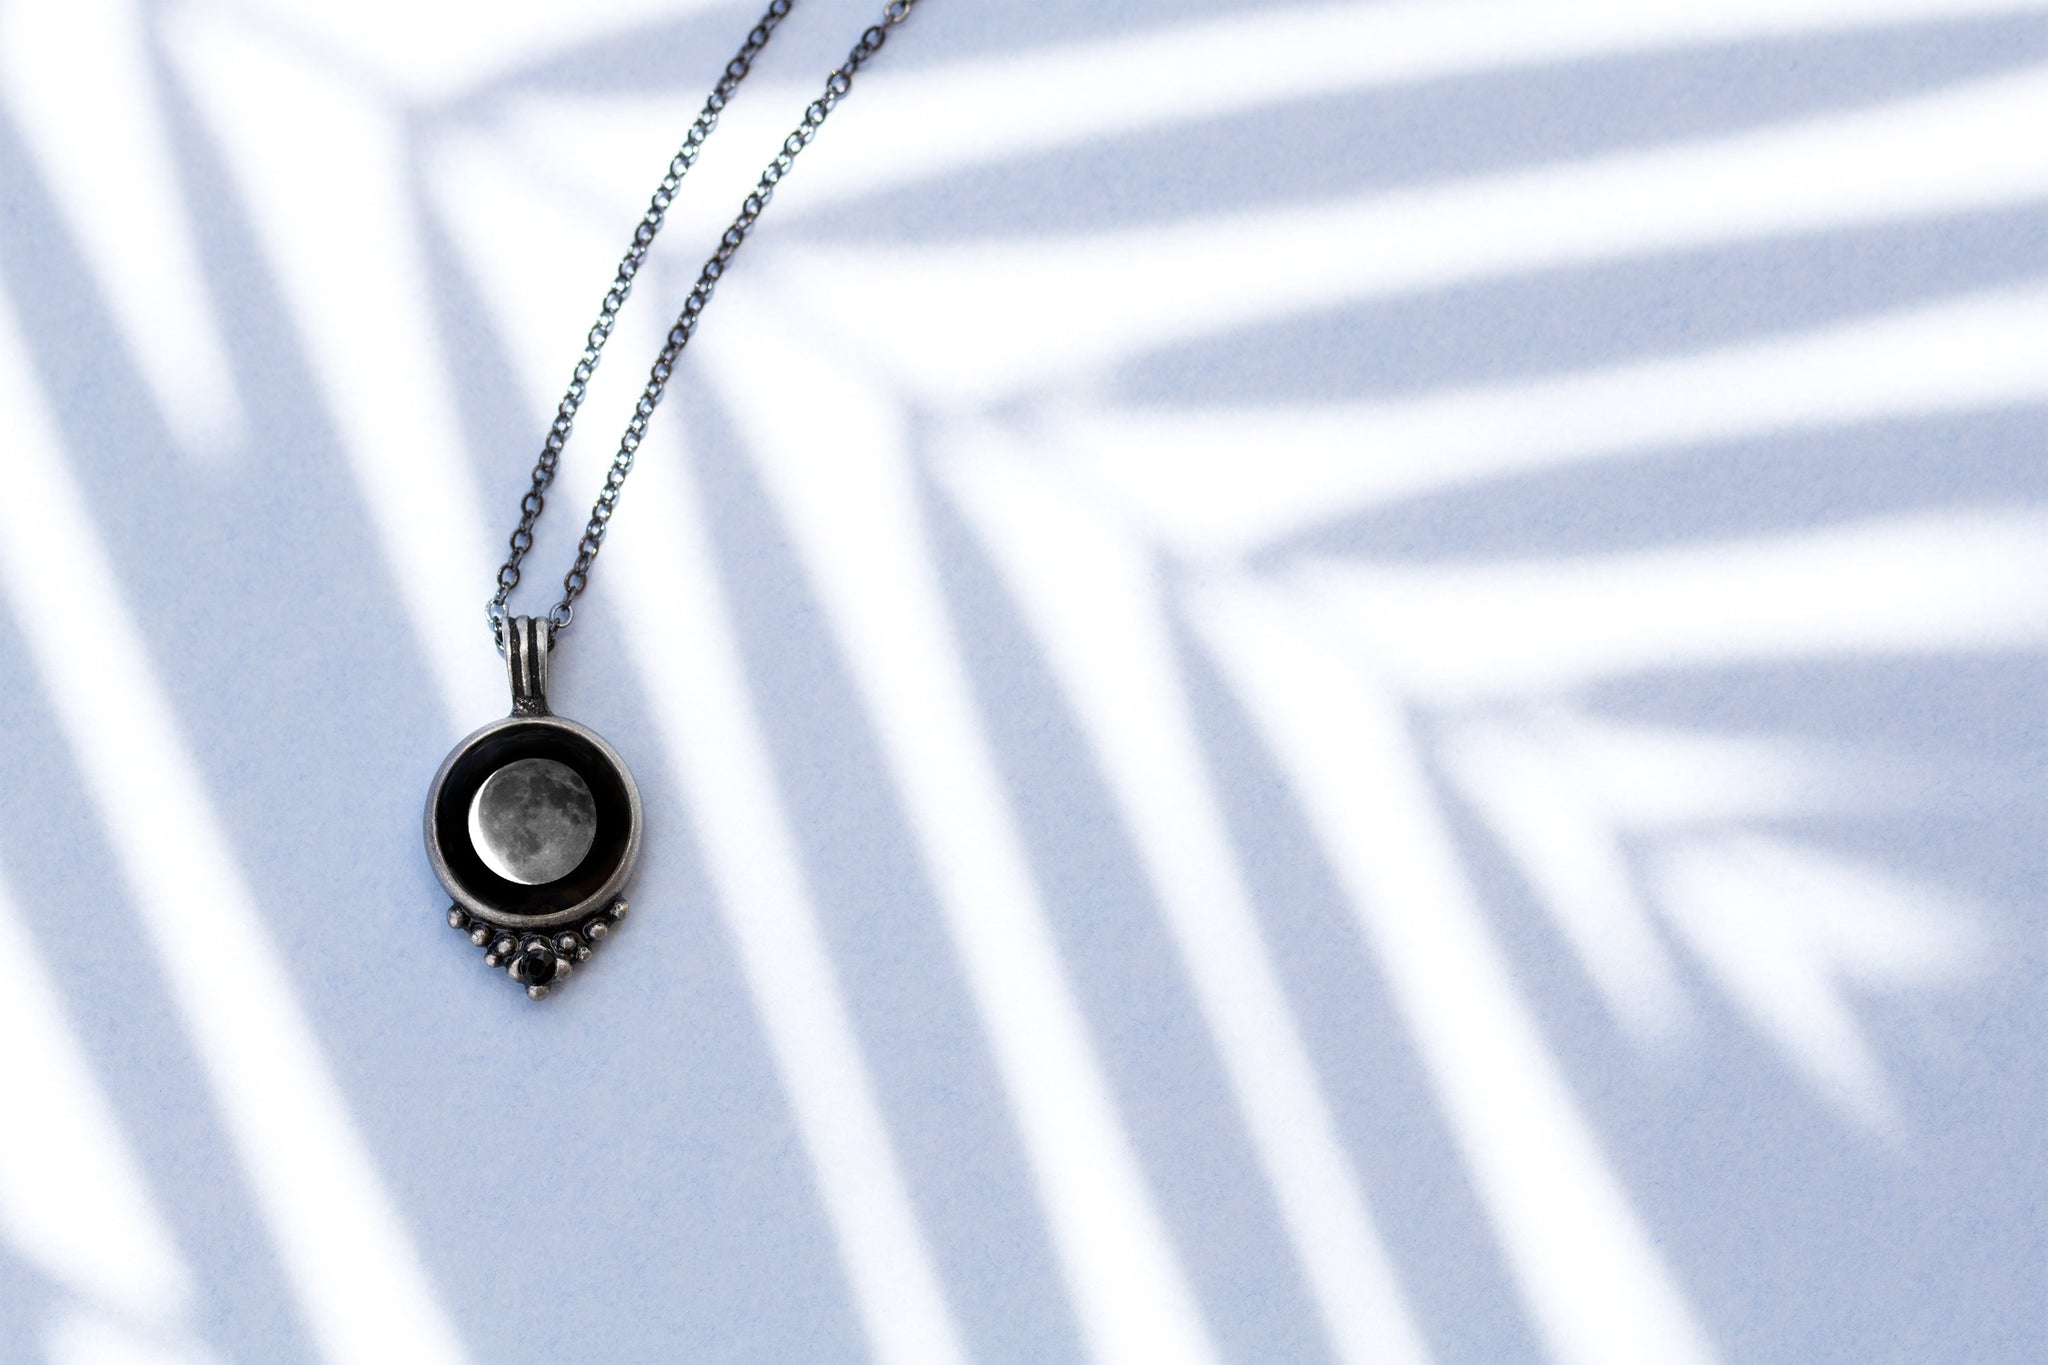 Classic Necklace With Black Crystal